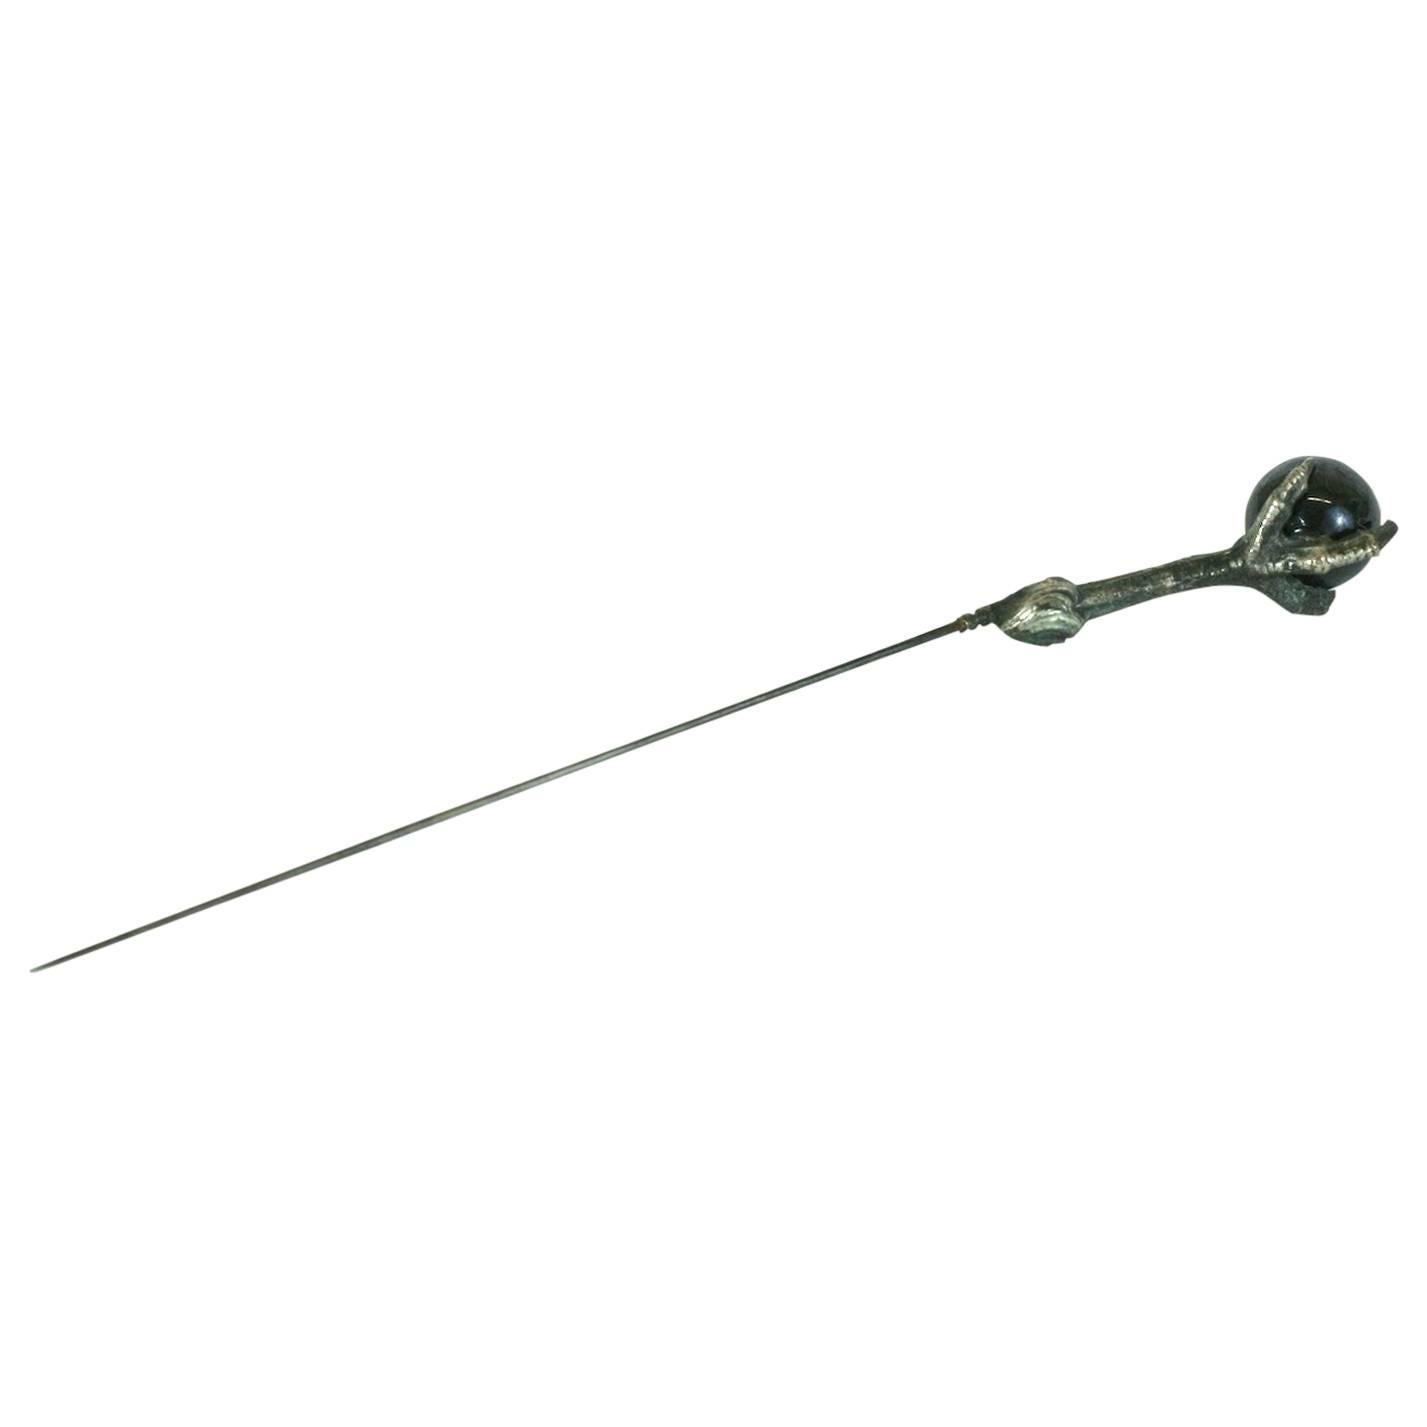 What is a hat pin used for?